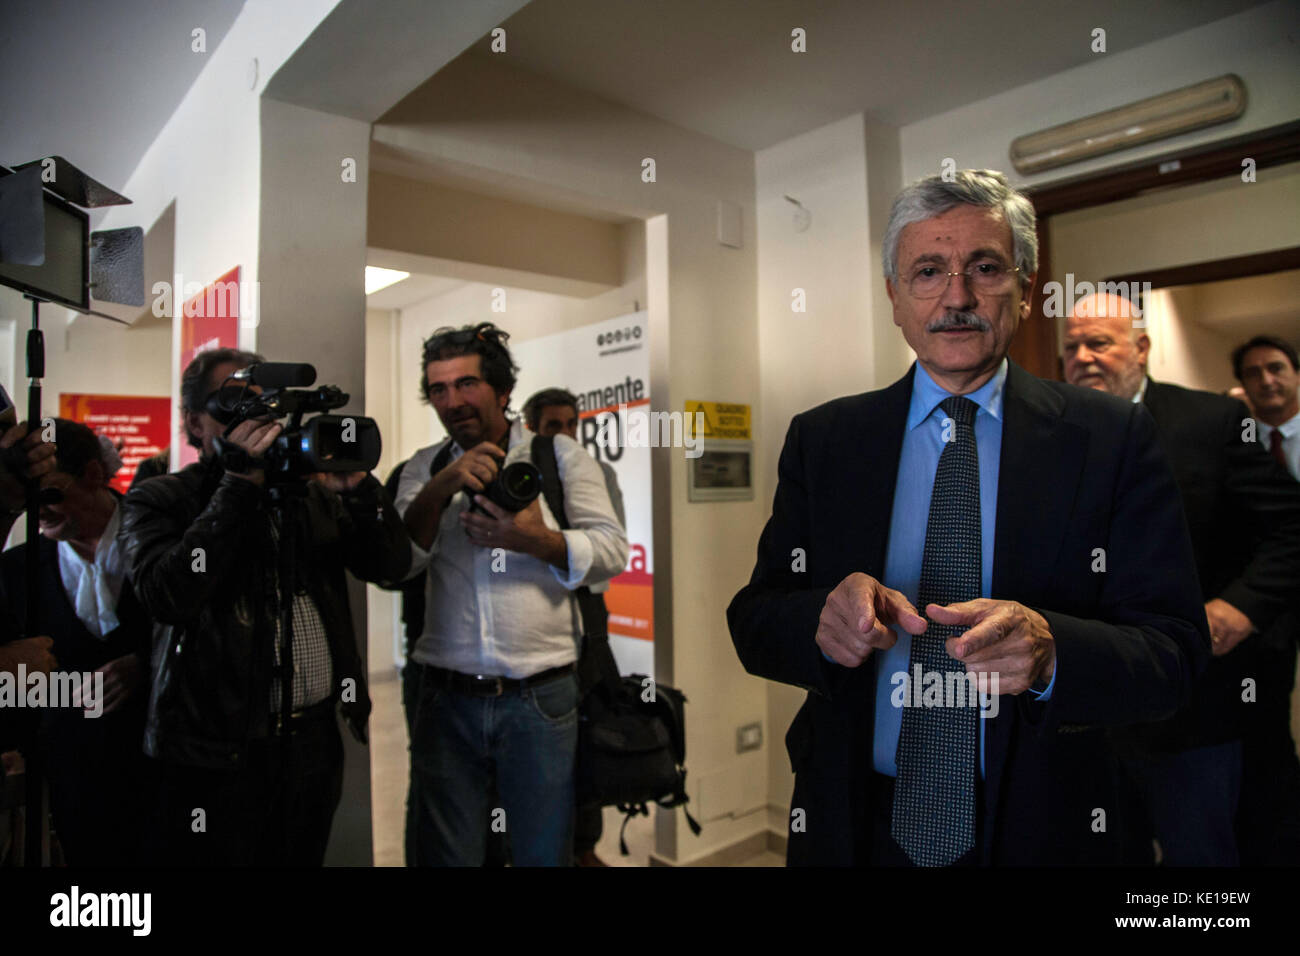 Massimo D'Alema during the press conference to support Claudio Fava's candidacy for the Presidency of the Sicilian Region. Stock Photo